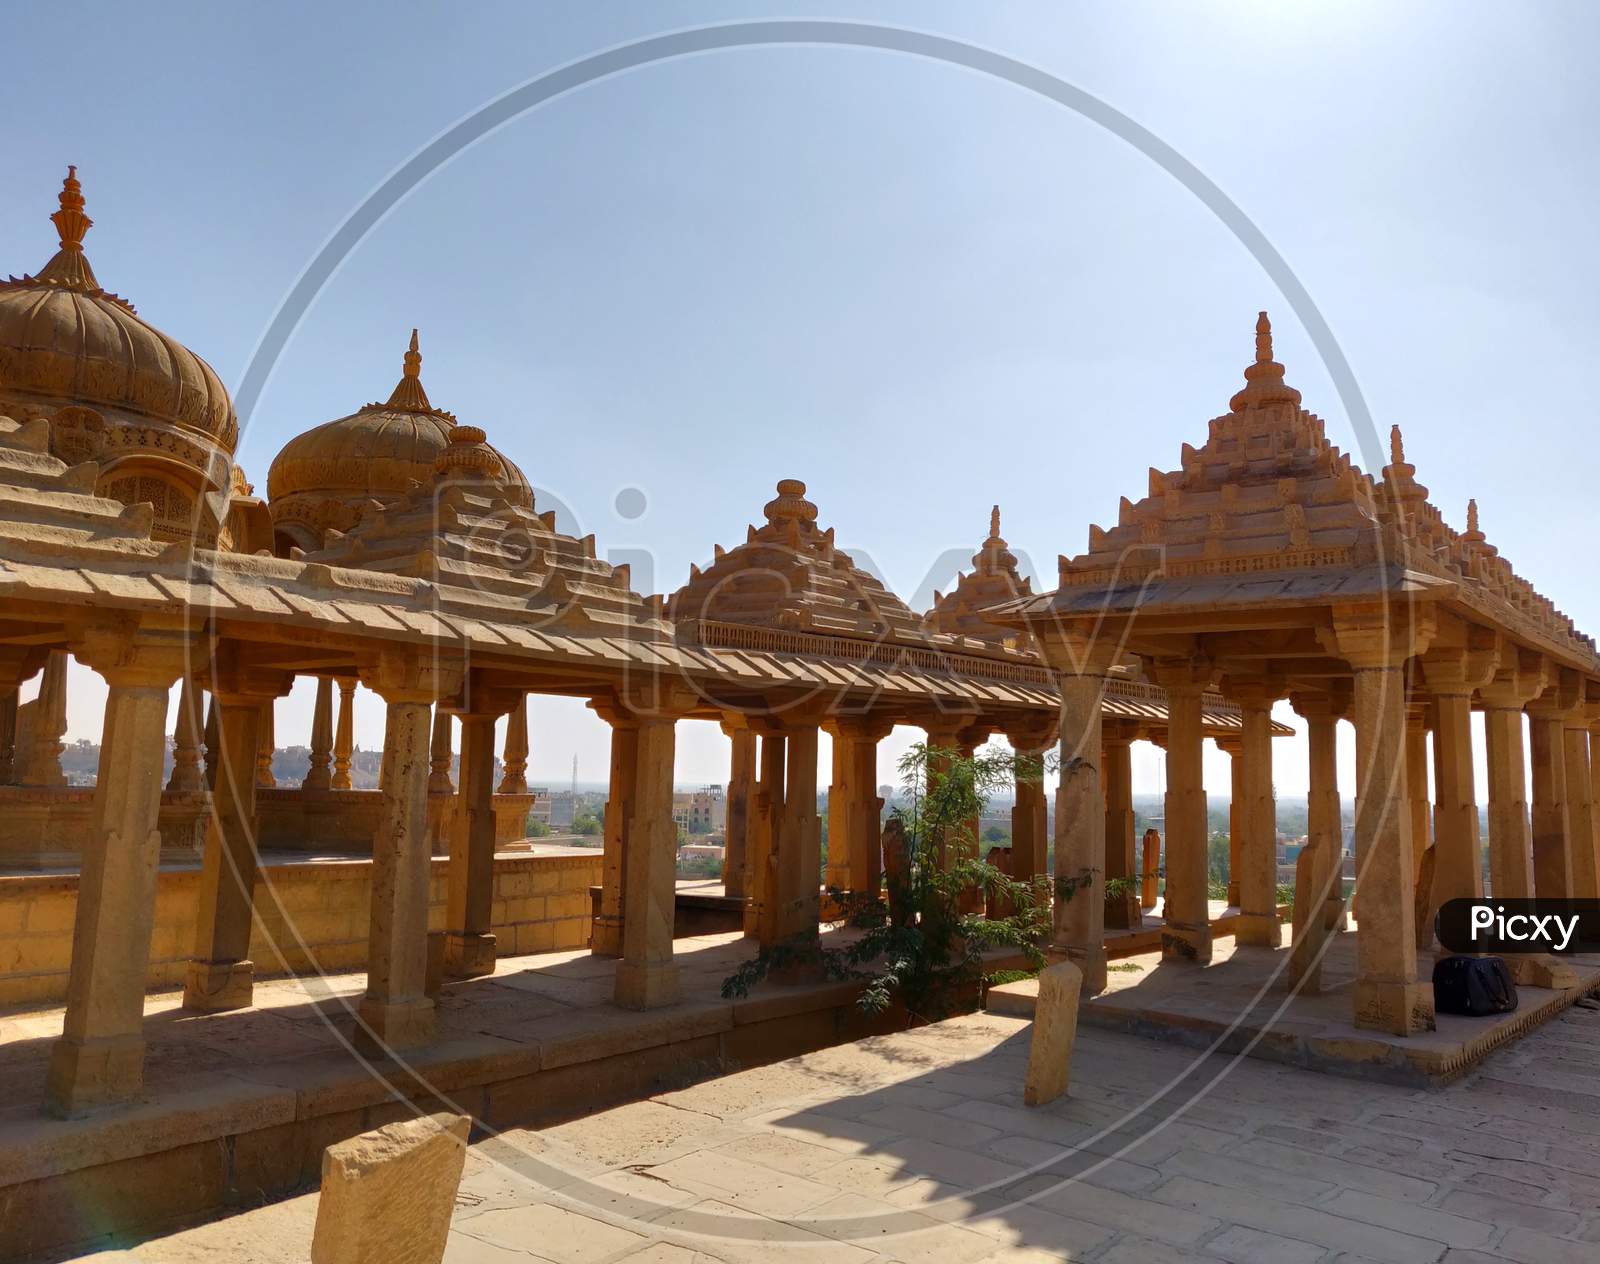 The royal cenotaphs of historic rulers, also known as Jaisalmer Chhatris, at Bada Bagh in Jaisalmer made of yellow sandstone at sunset